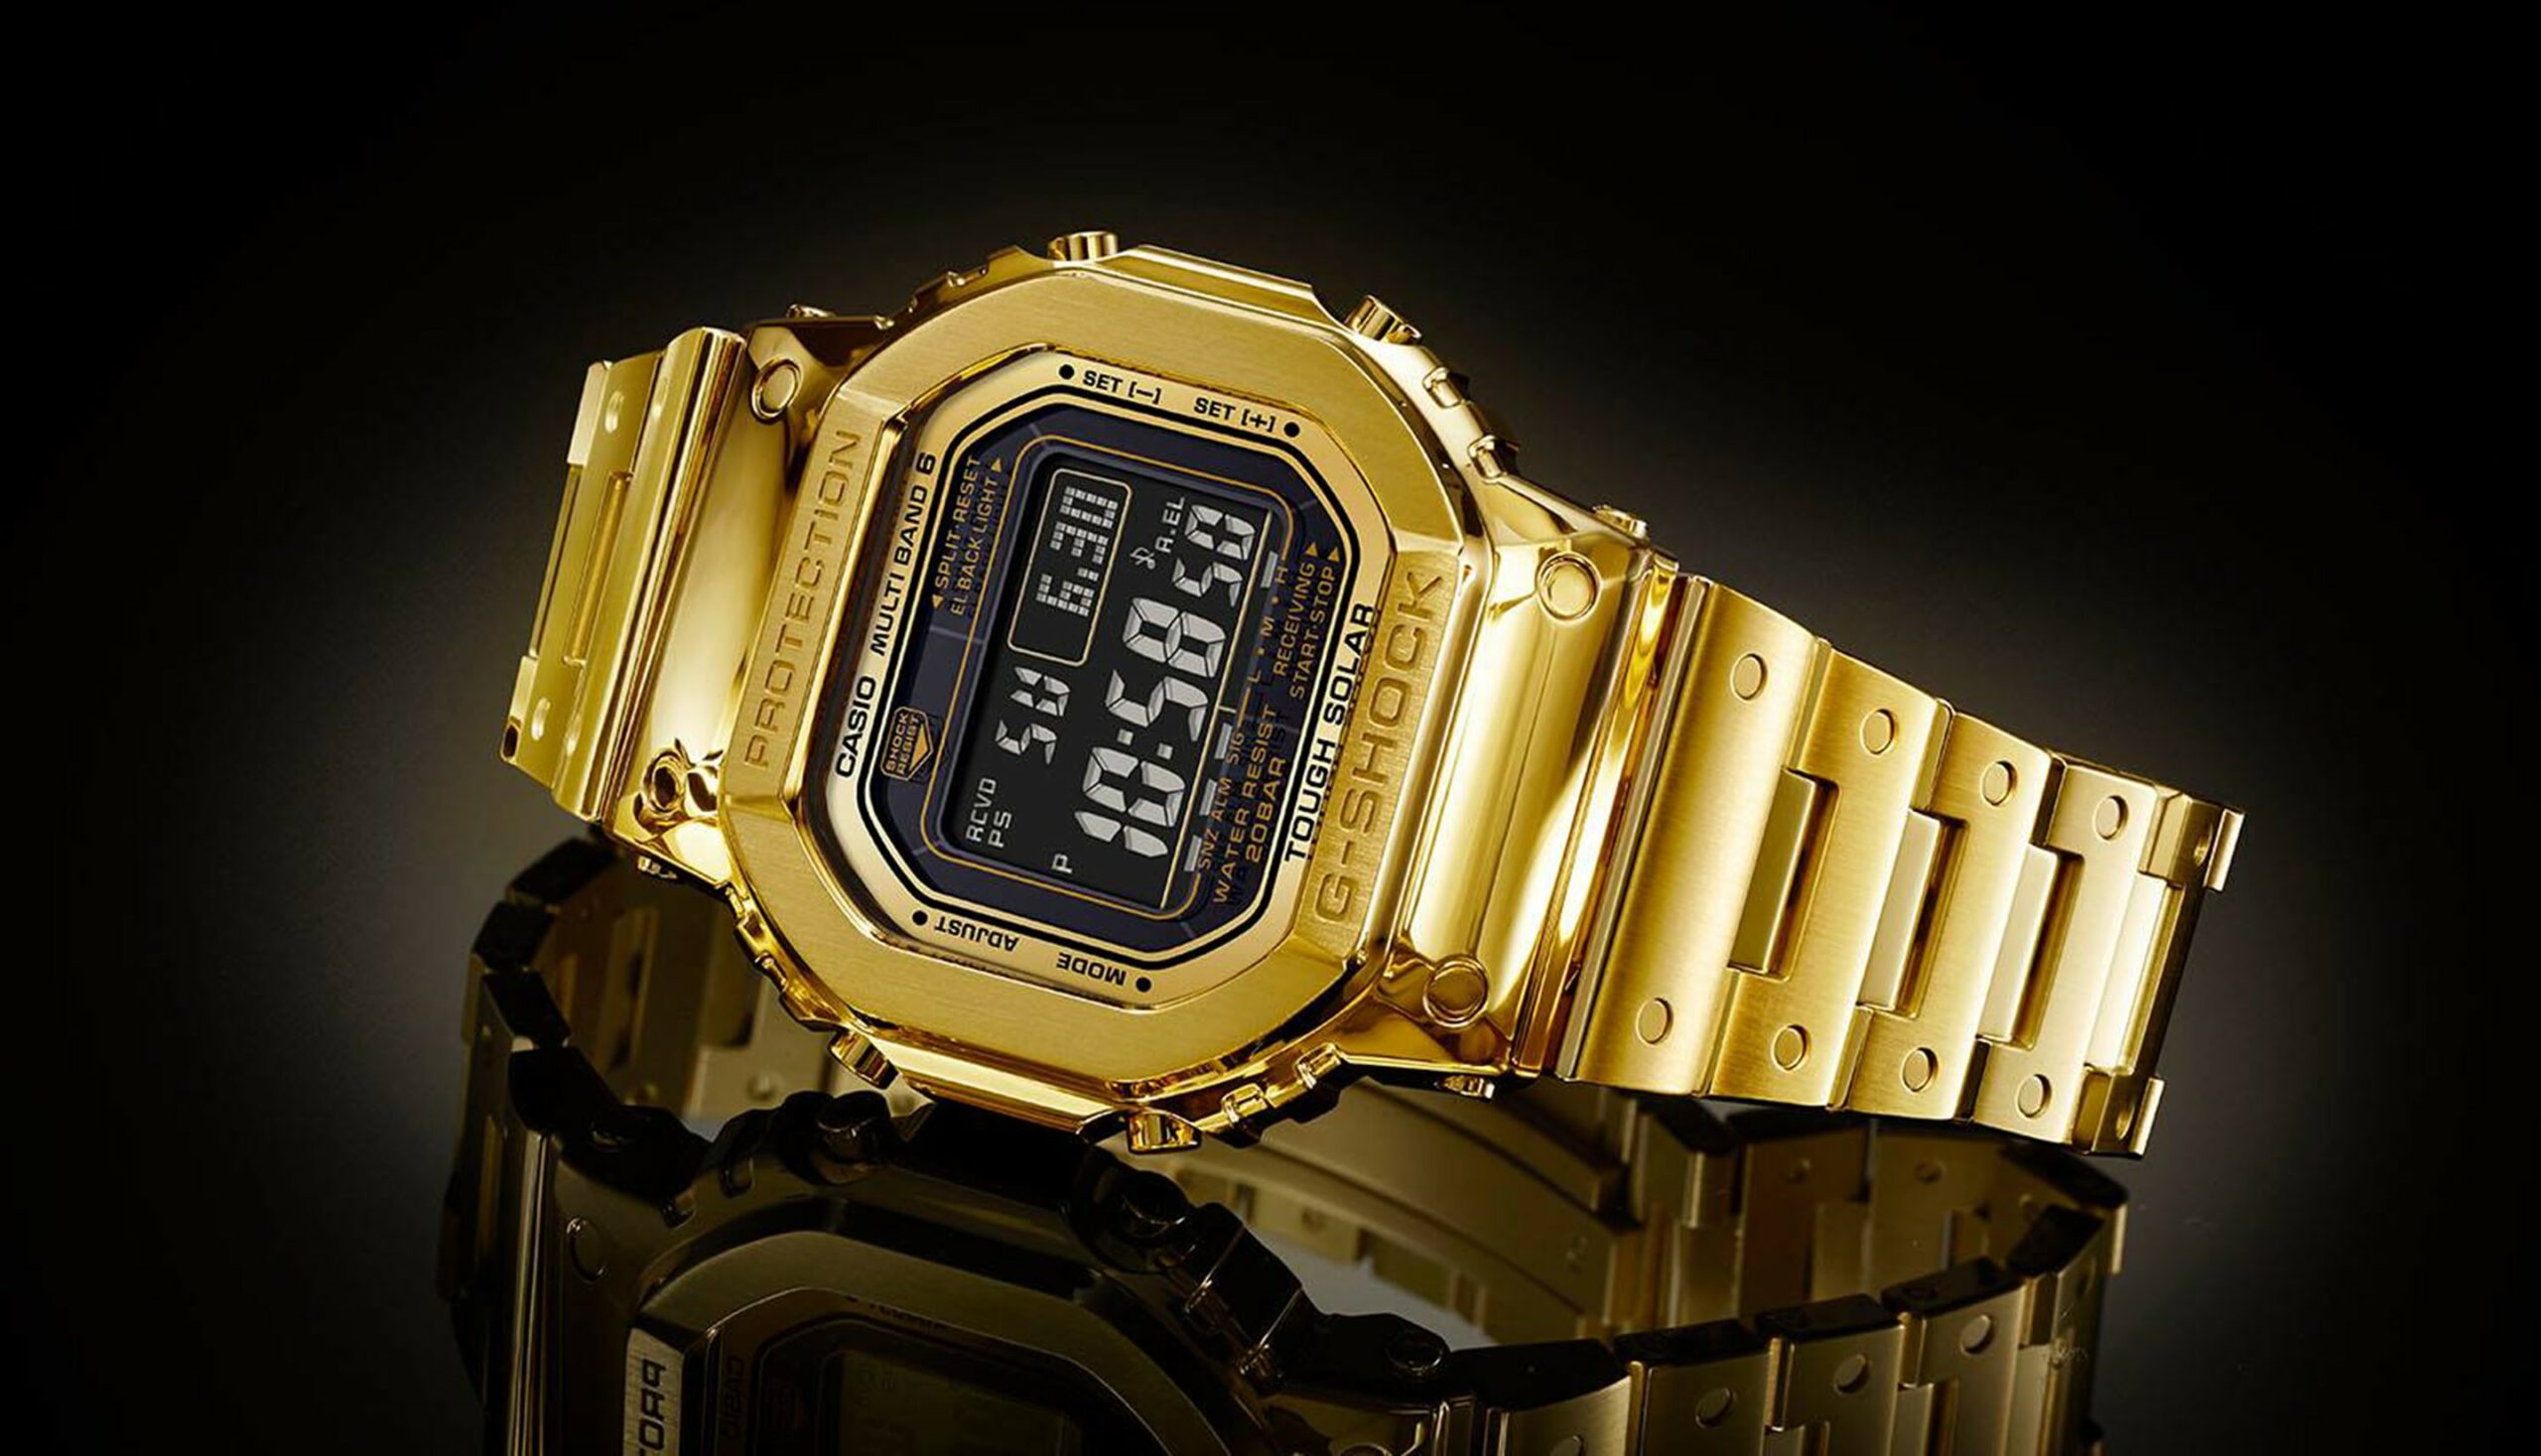 F】 G-Shock G-D001: The Most Expensive G-Shock Watch Ever